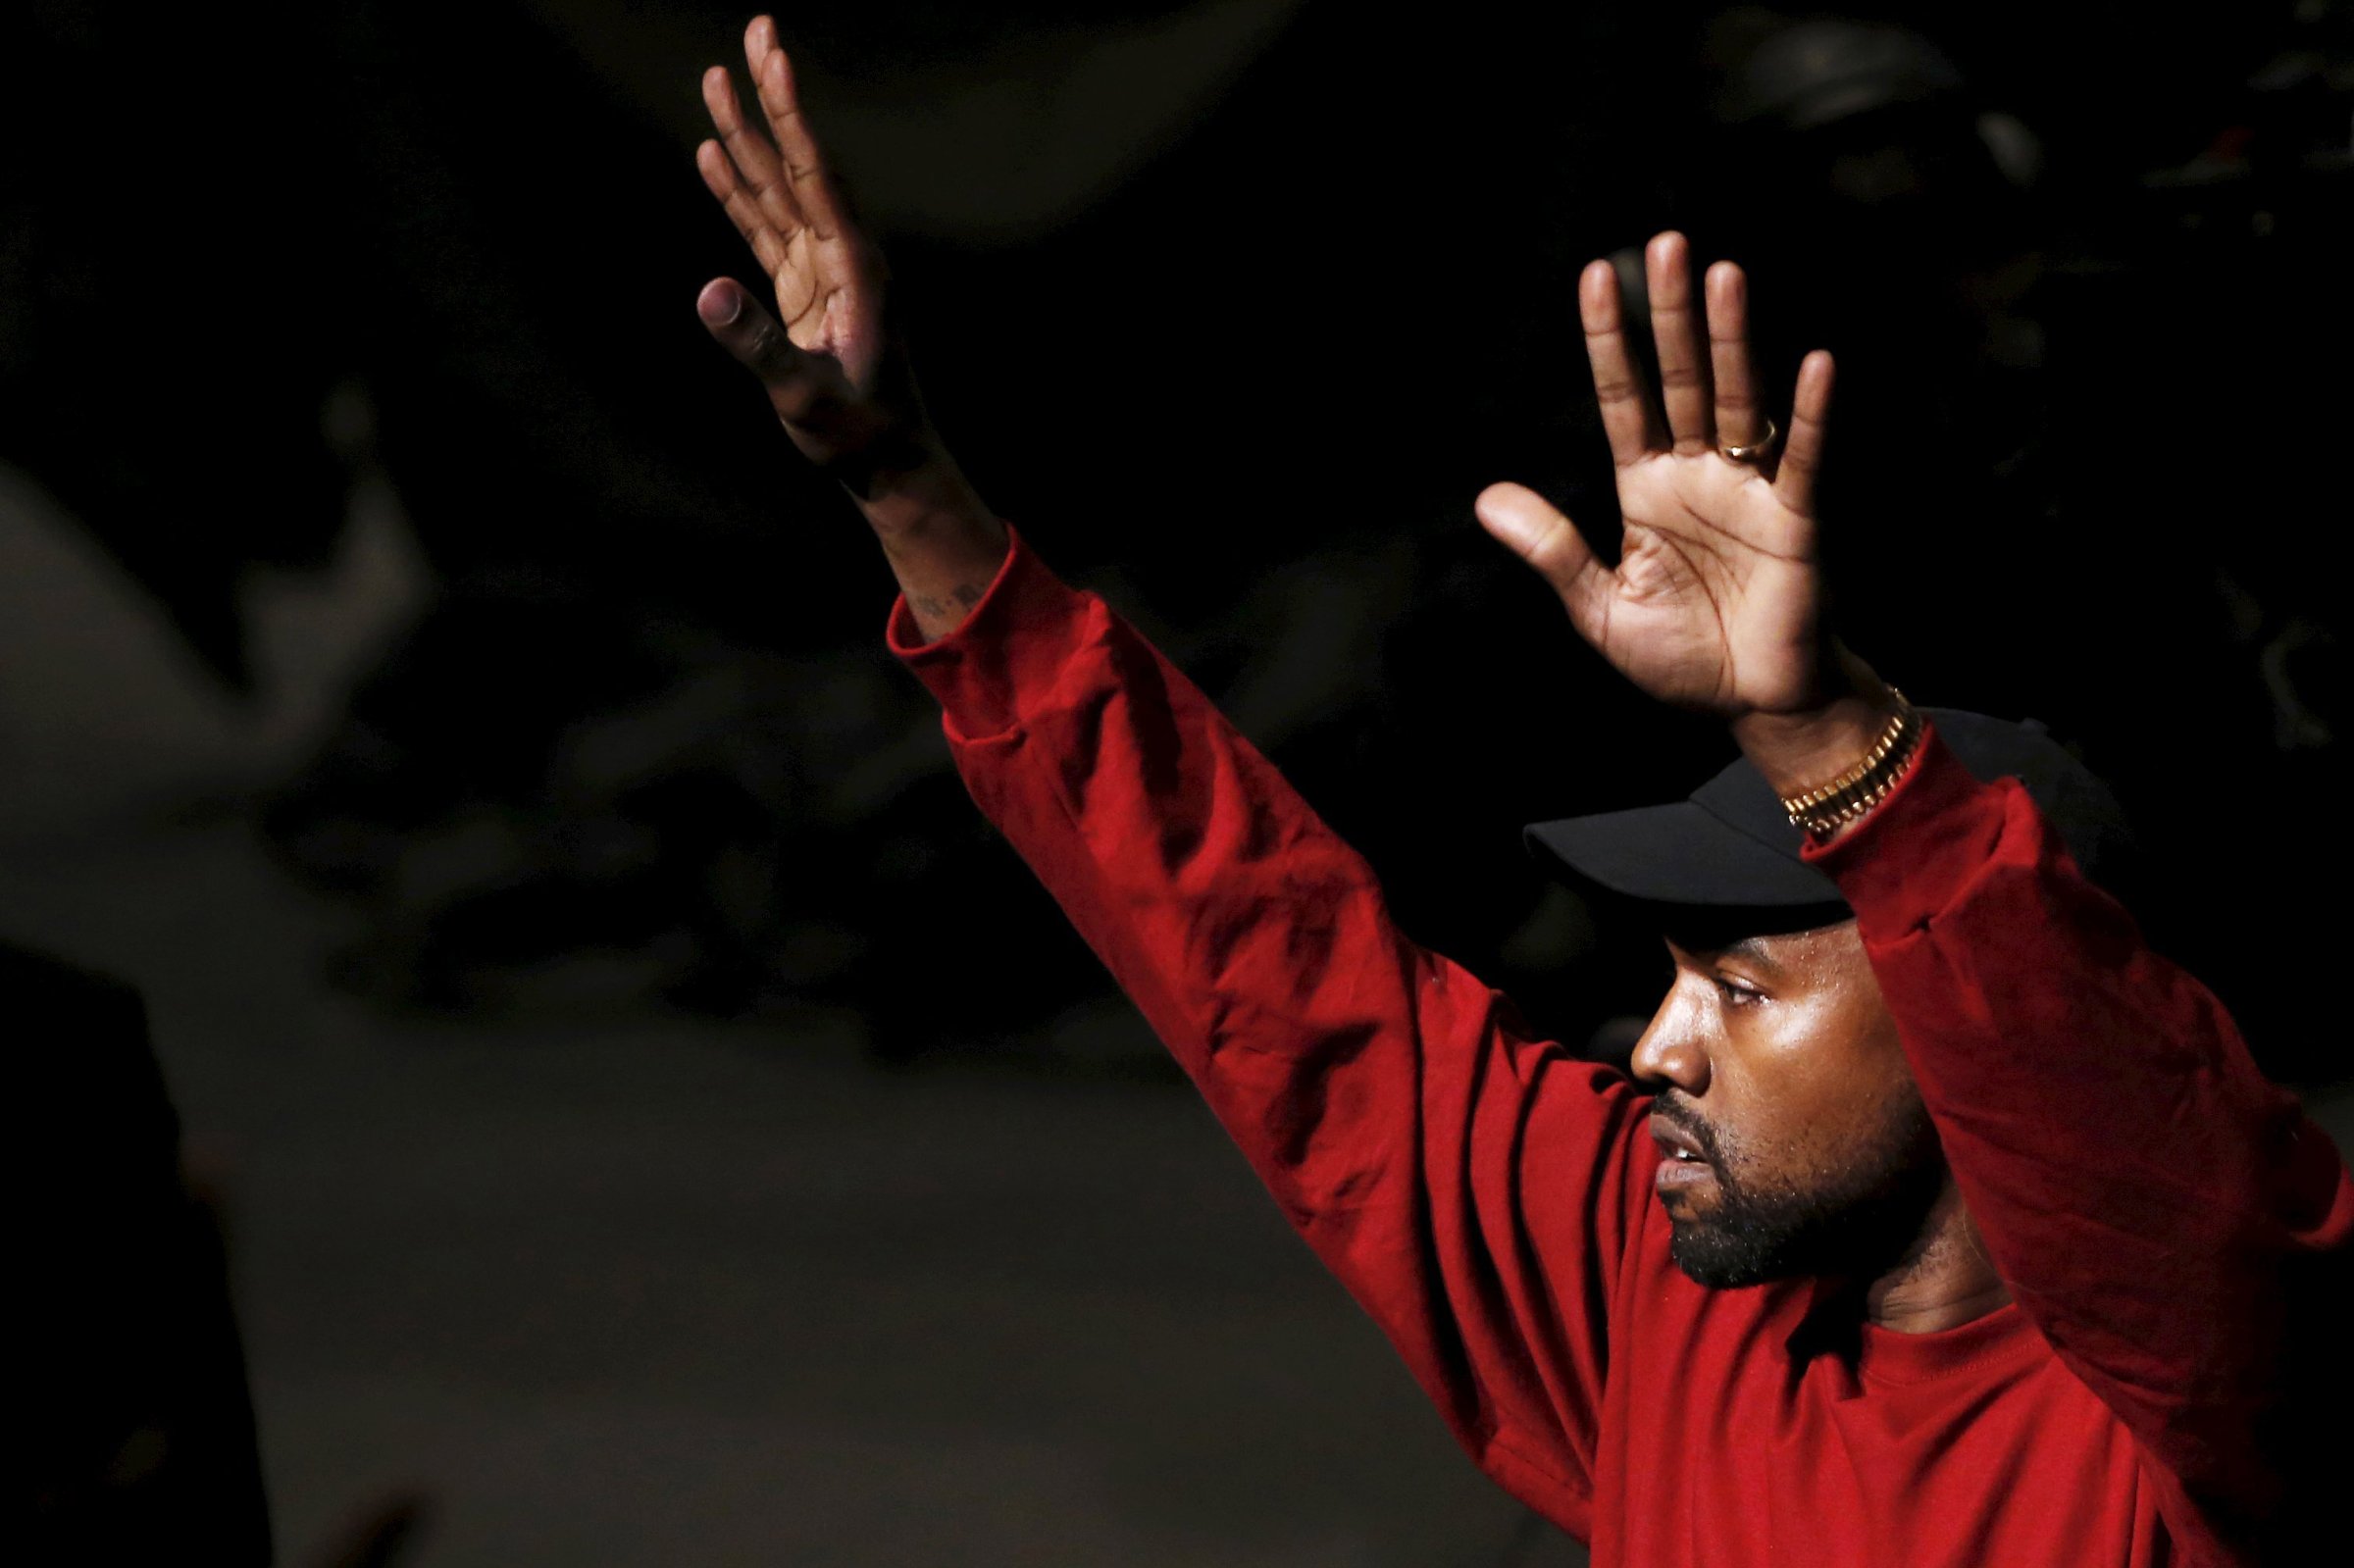 Kanye West acknowledges attendees during his Yeezy Season 3 Collection presentation and listening party at New York Fashion Week on Feb. 11, 2016. Hillary Clinton Democratic Debate